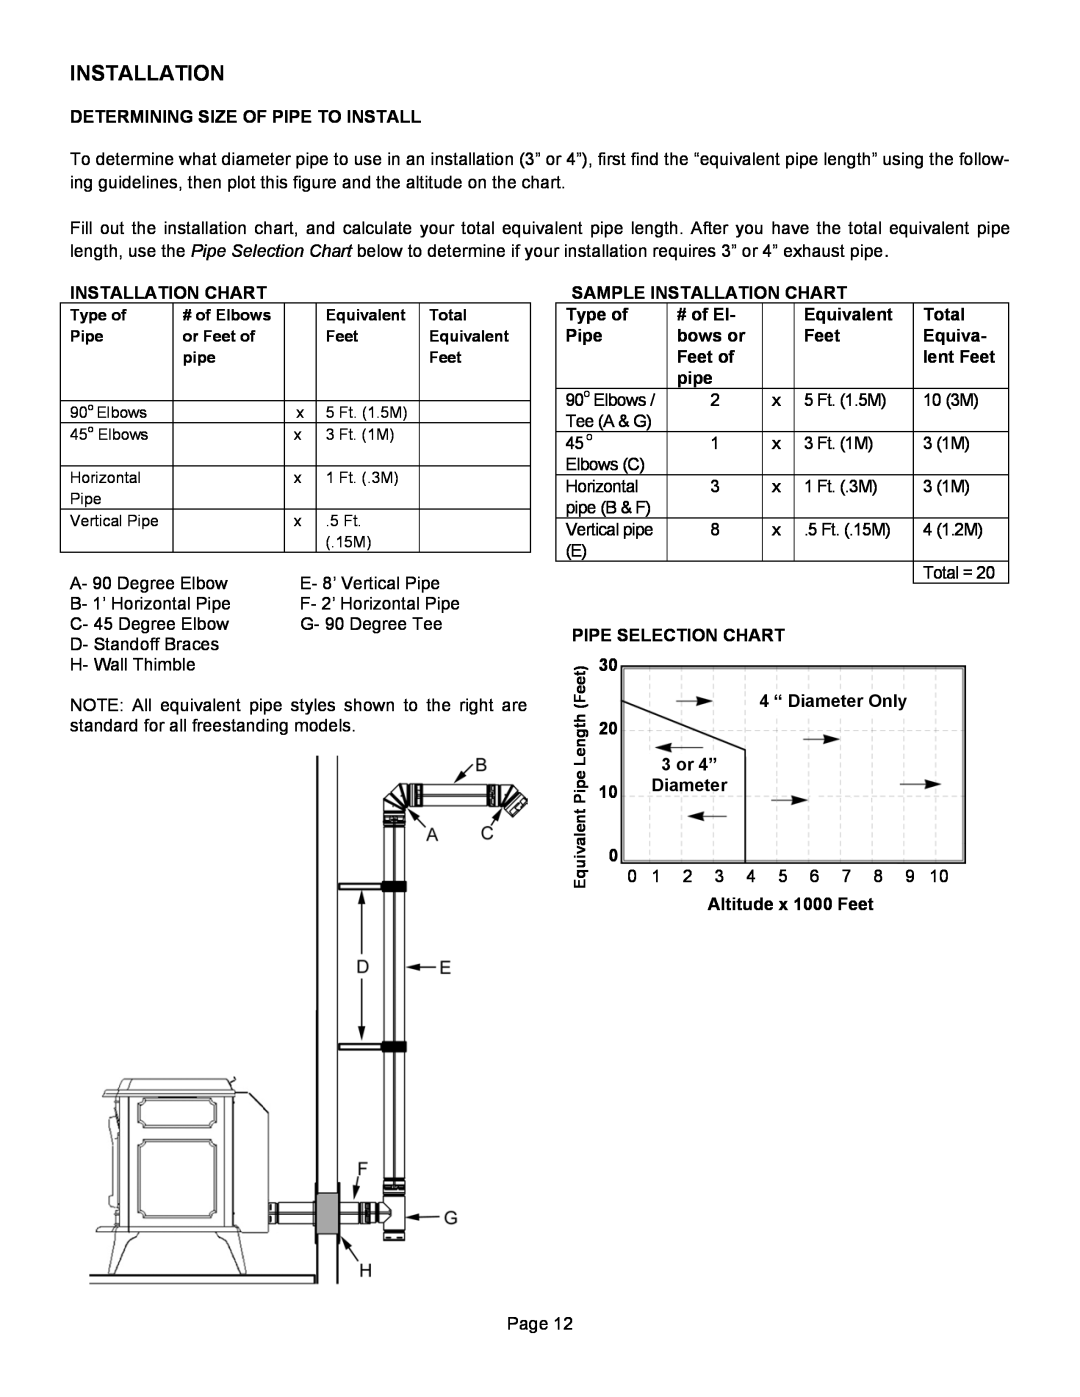 Lennox Hearth T300P operation manual Installation, Determining Size Of Pipe To Install 